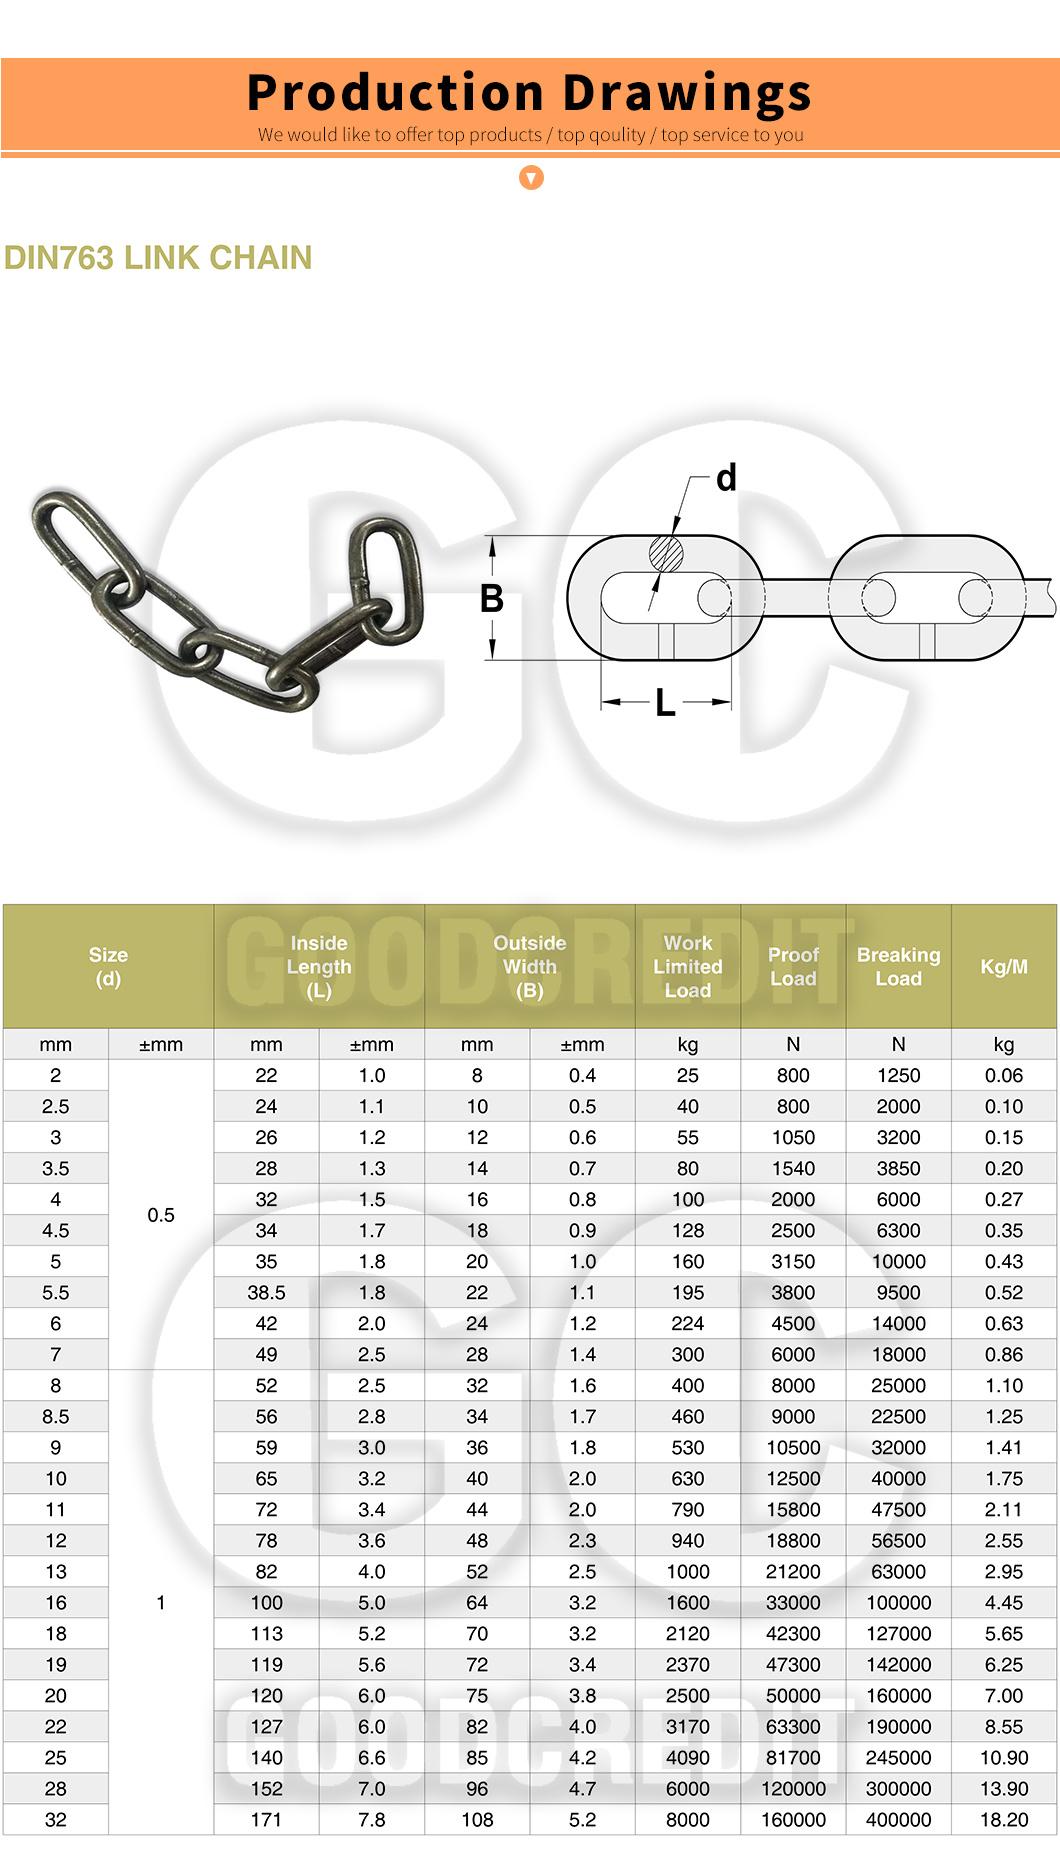 HDG DIN 763 Mild Steel Medium Link Welded Chain Made in China